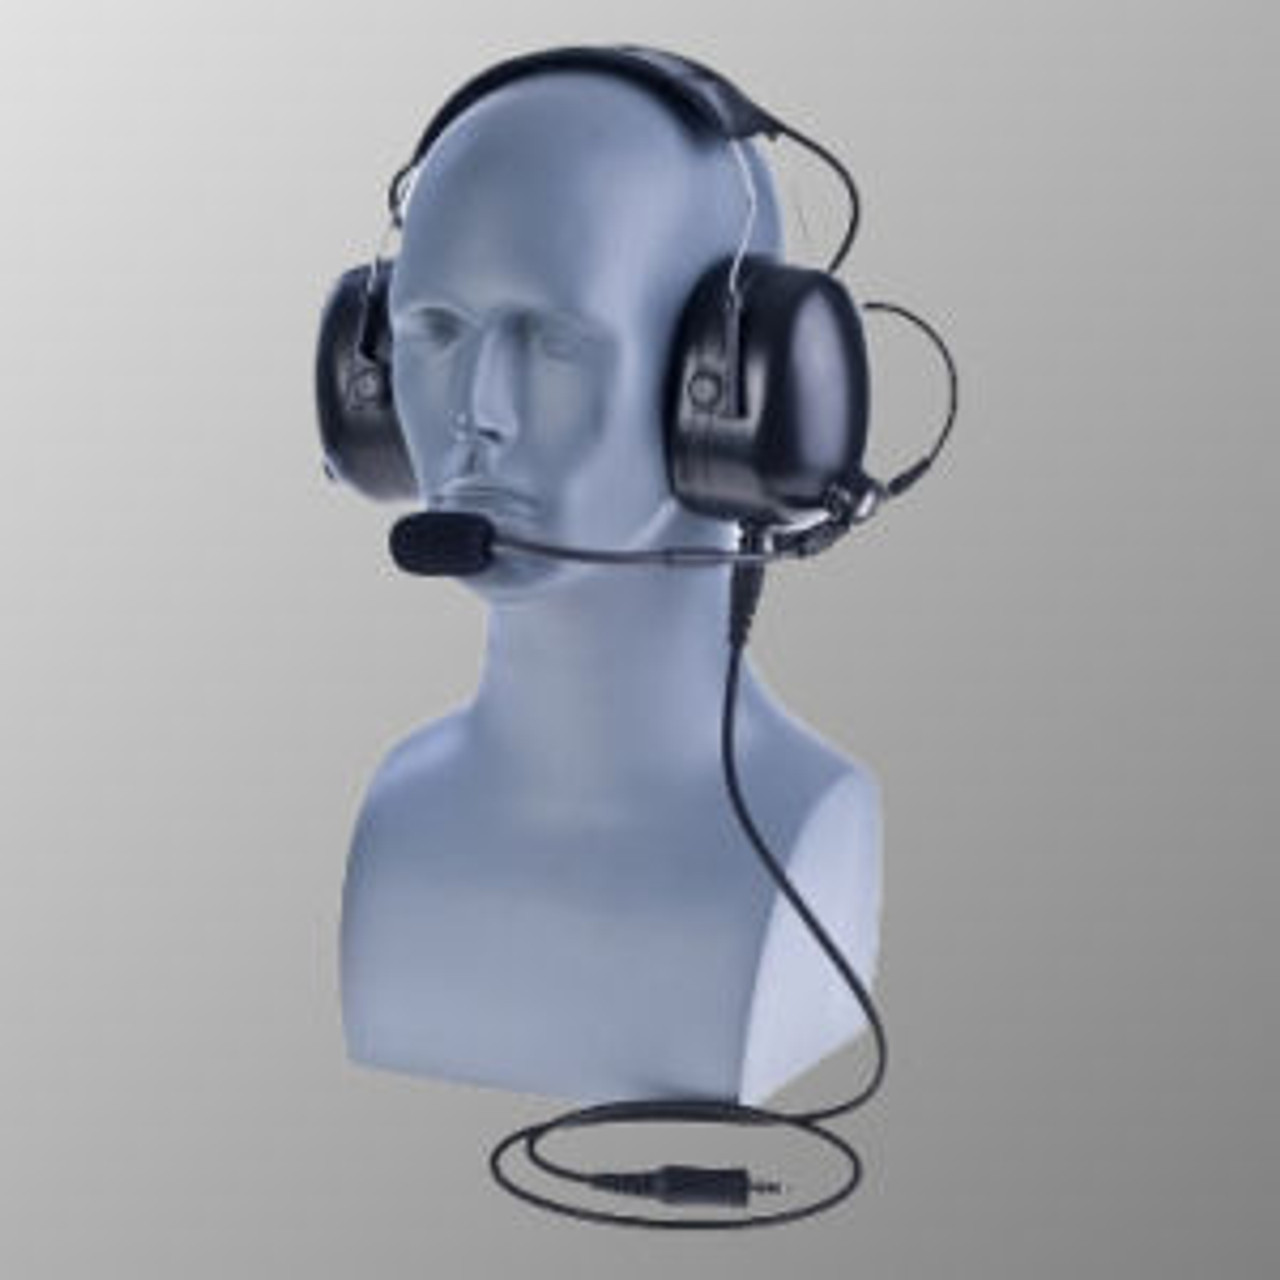 EF Johnson VP5430 Over The Head Double Muff Headset With WIreless PTT